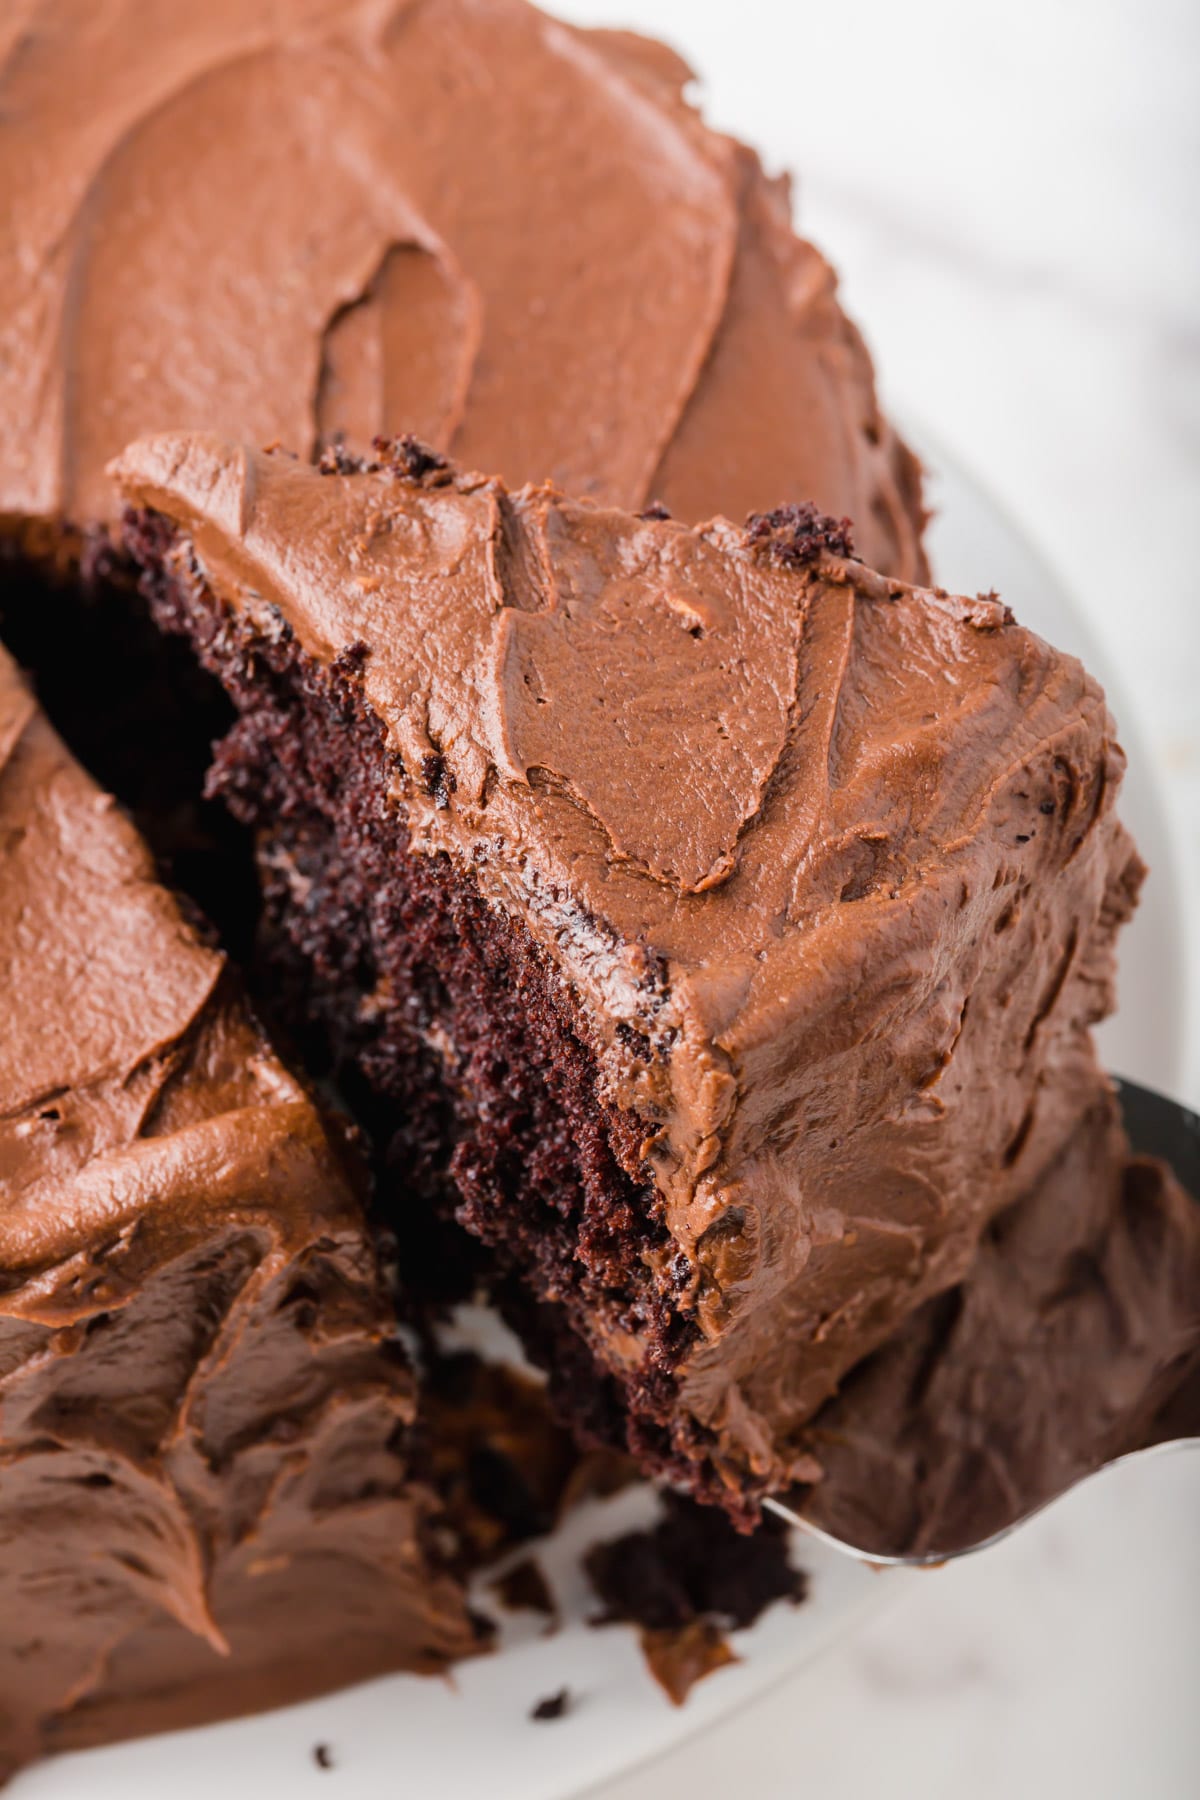 A slice of a gluten-free chocolate cake with chocolate frosting being lifted from the cake.